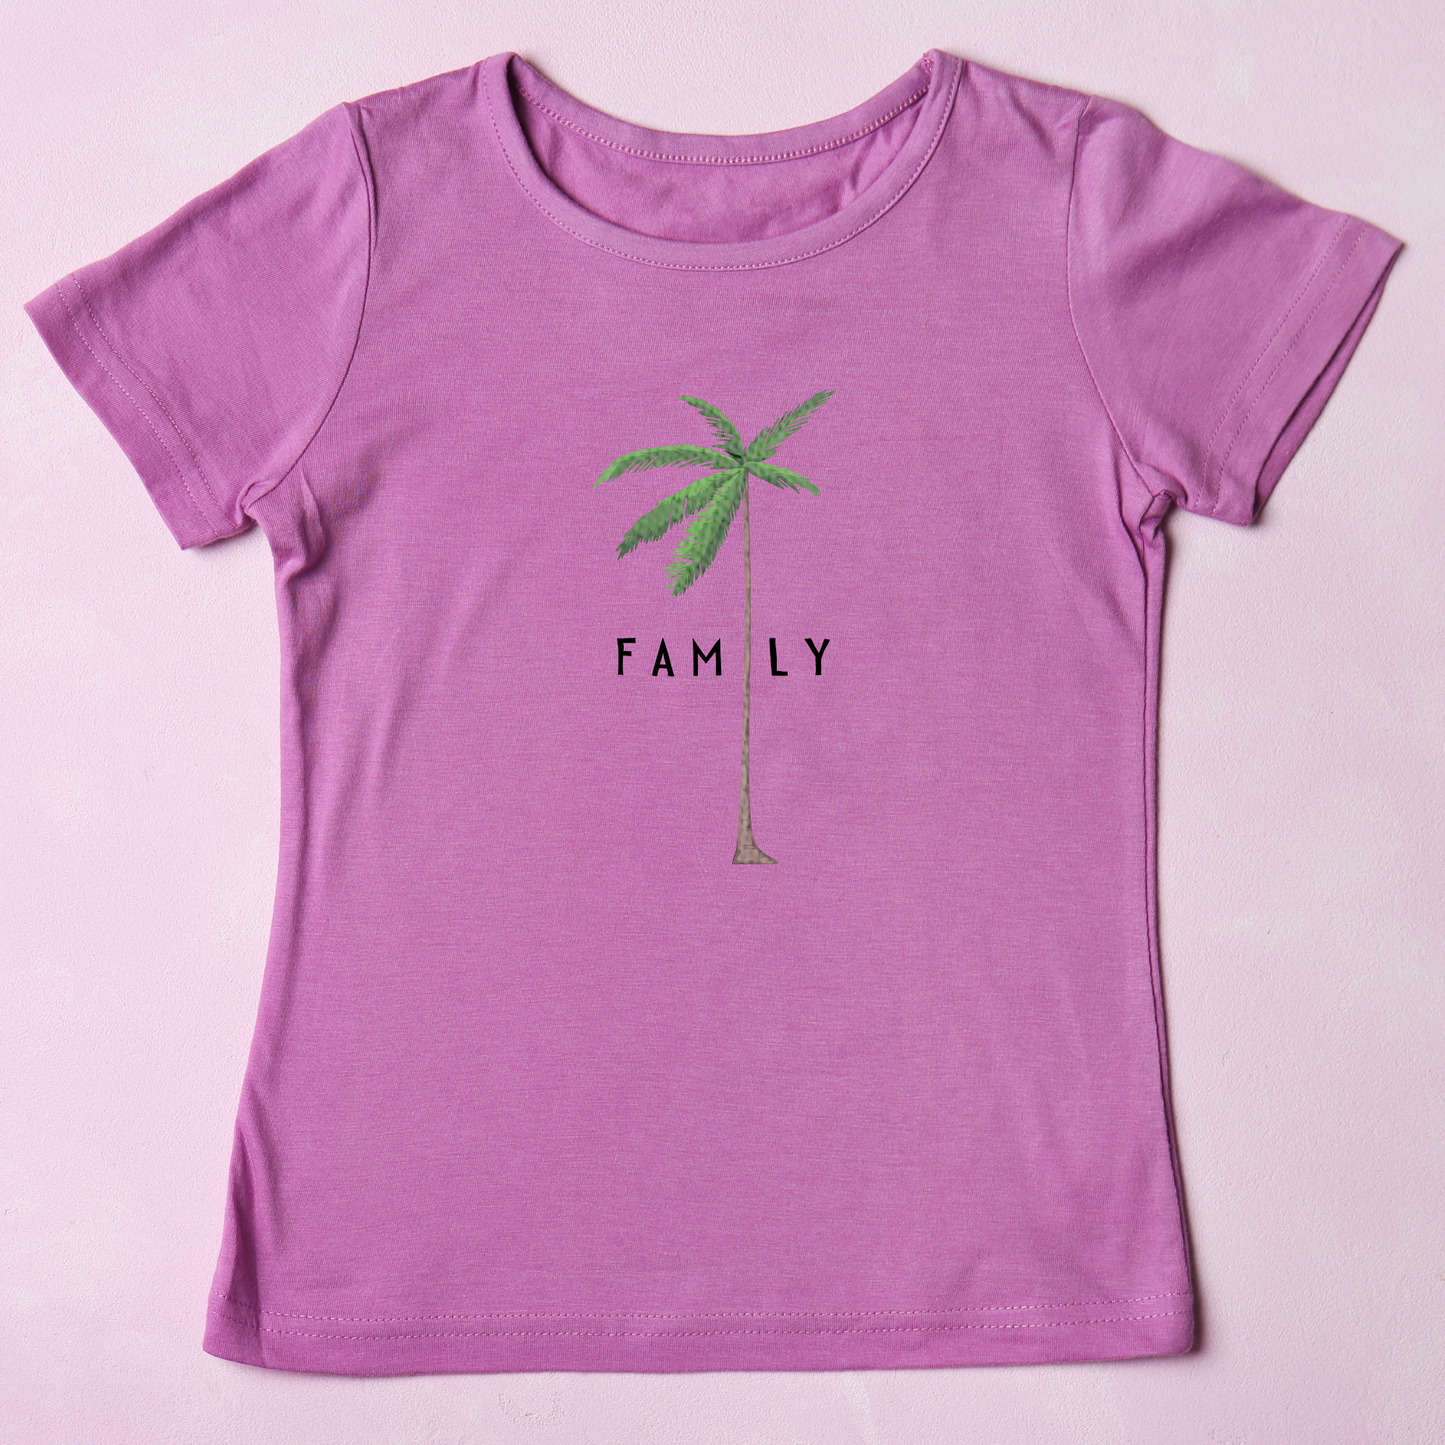 (Shirt not included) Family Palm tree 4.5" x 7"-  Matte Clear Film Transfer